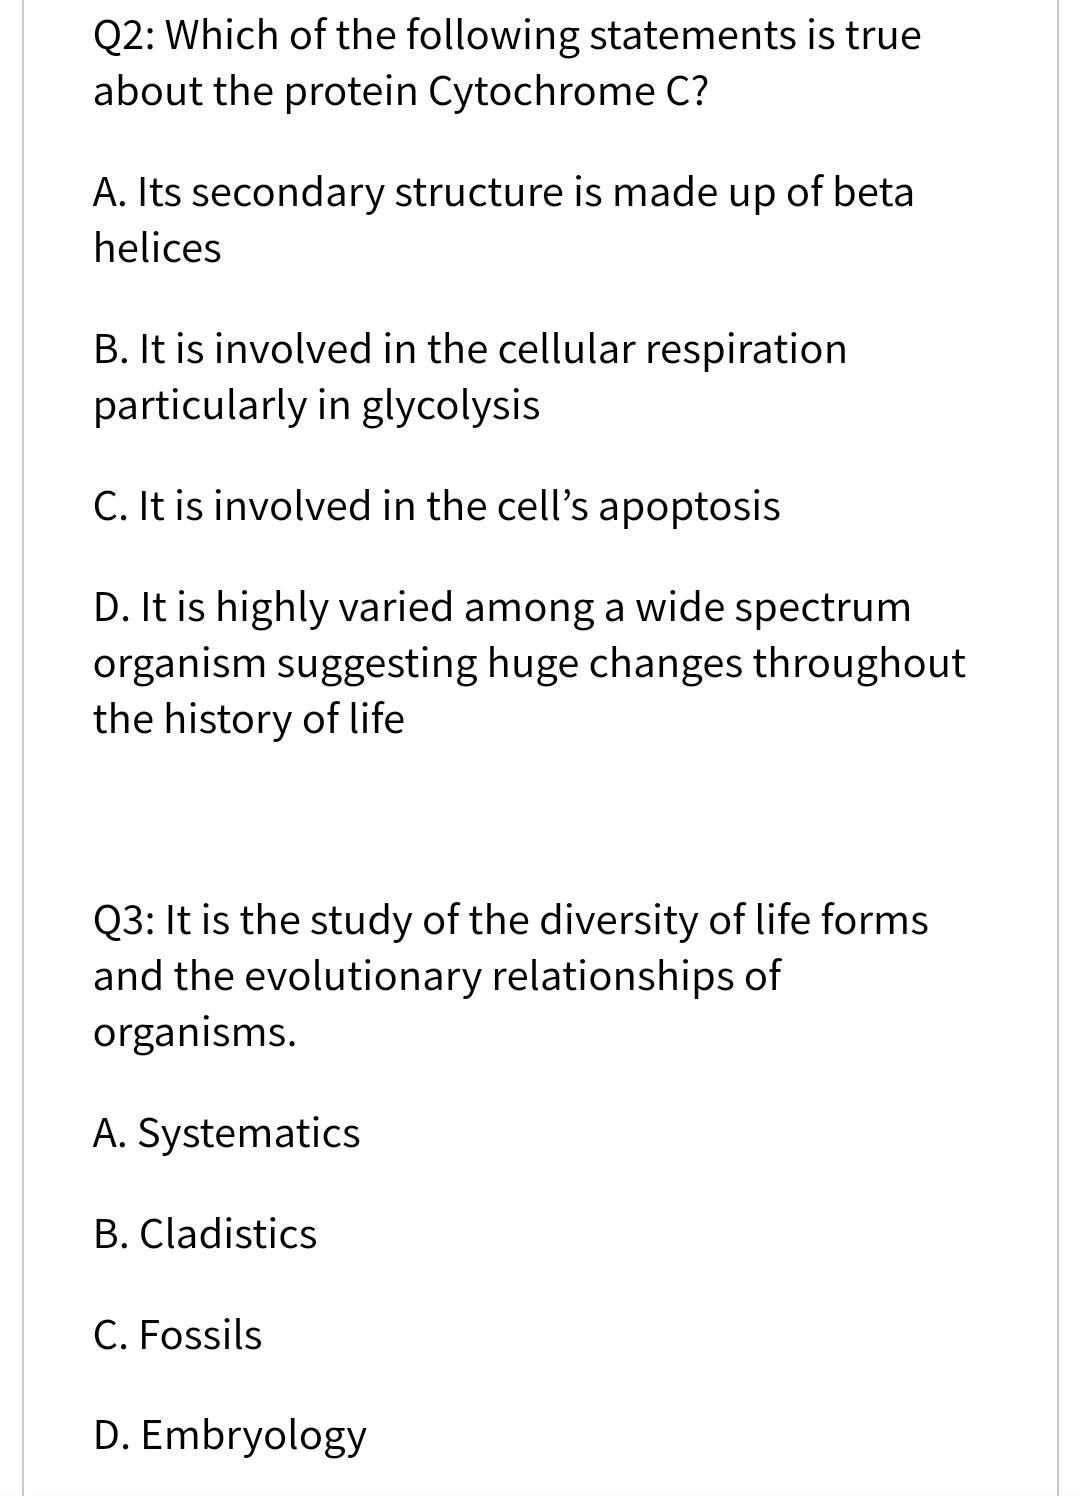 Q2: Which of the following statements is true
about the protein Cytochrome C?
A. Its secondary structure is made up of beta
helices
B. It is involved in the cellular respiration
particularly in glycolysis
C. It is involved in the cell's apoptosis
D. It is highly varied among a wide spectrum
organism suggesting huge changes throughout
the history of life
Q3: It is the study of the diversity of life forms
and the evolutionary relationships of
organisms.
A. Systematics
B. Cladistics
C. Fossils
D. Embryology
